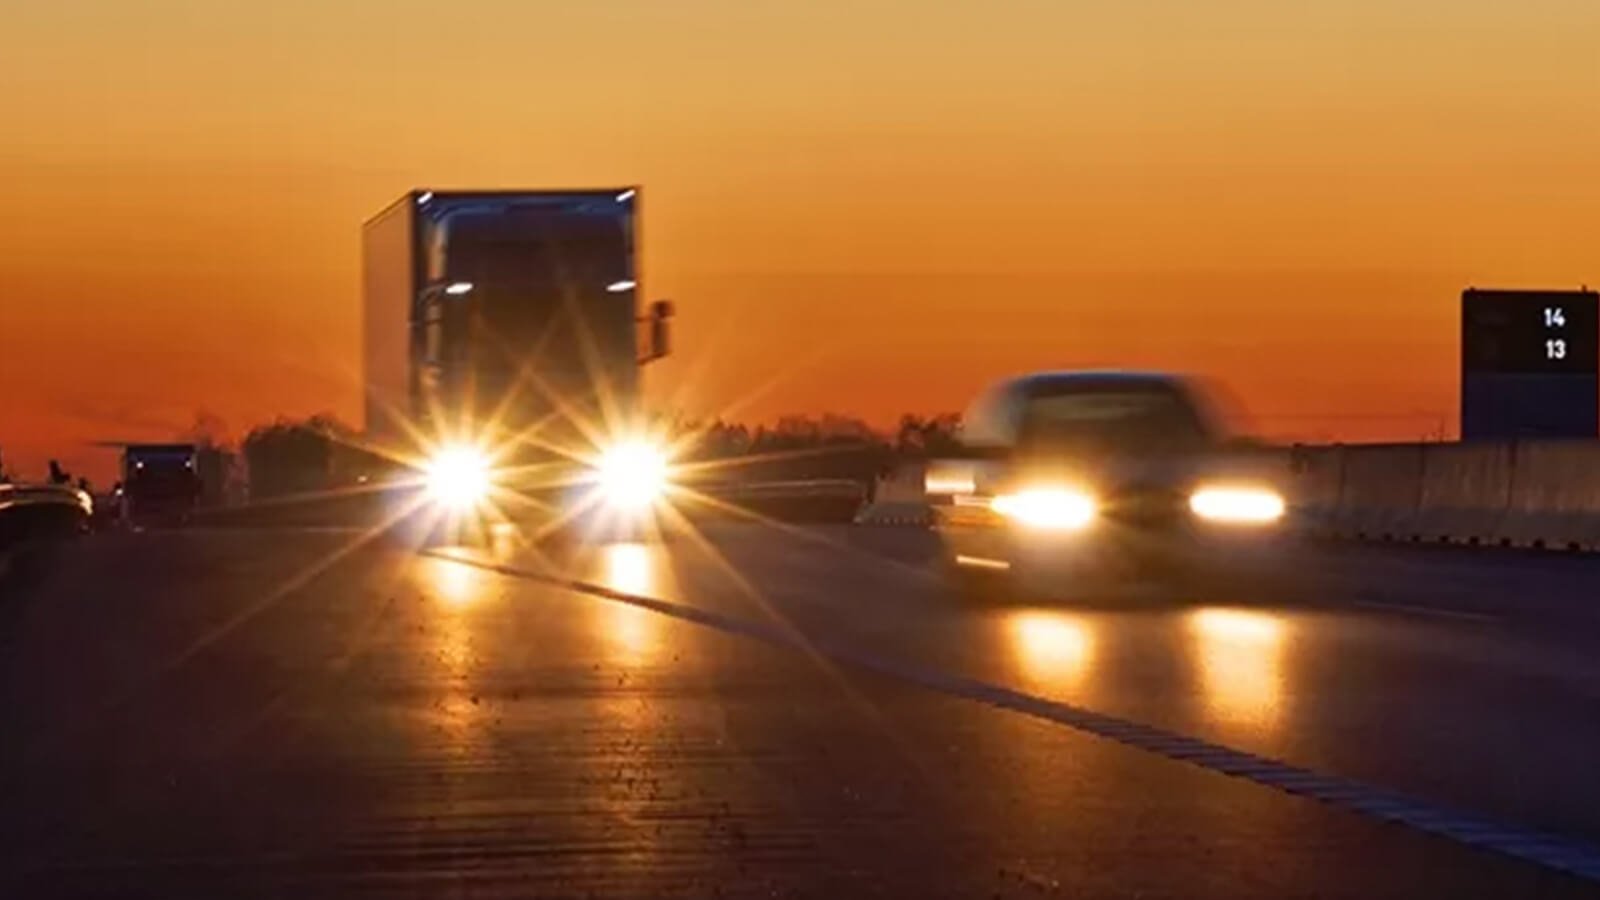 How does glare hit you while driving?